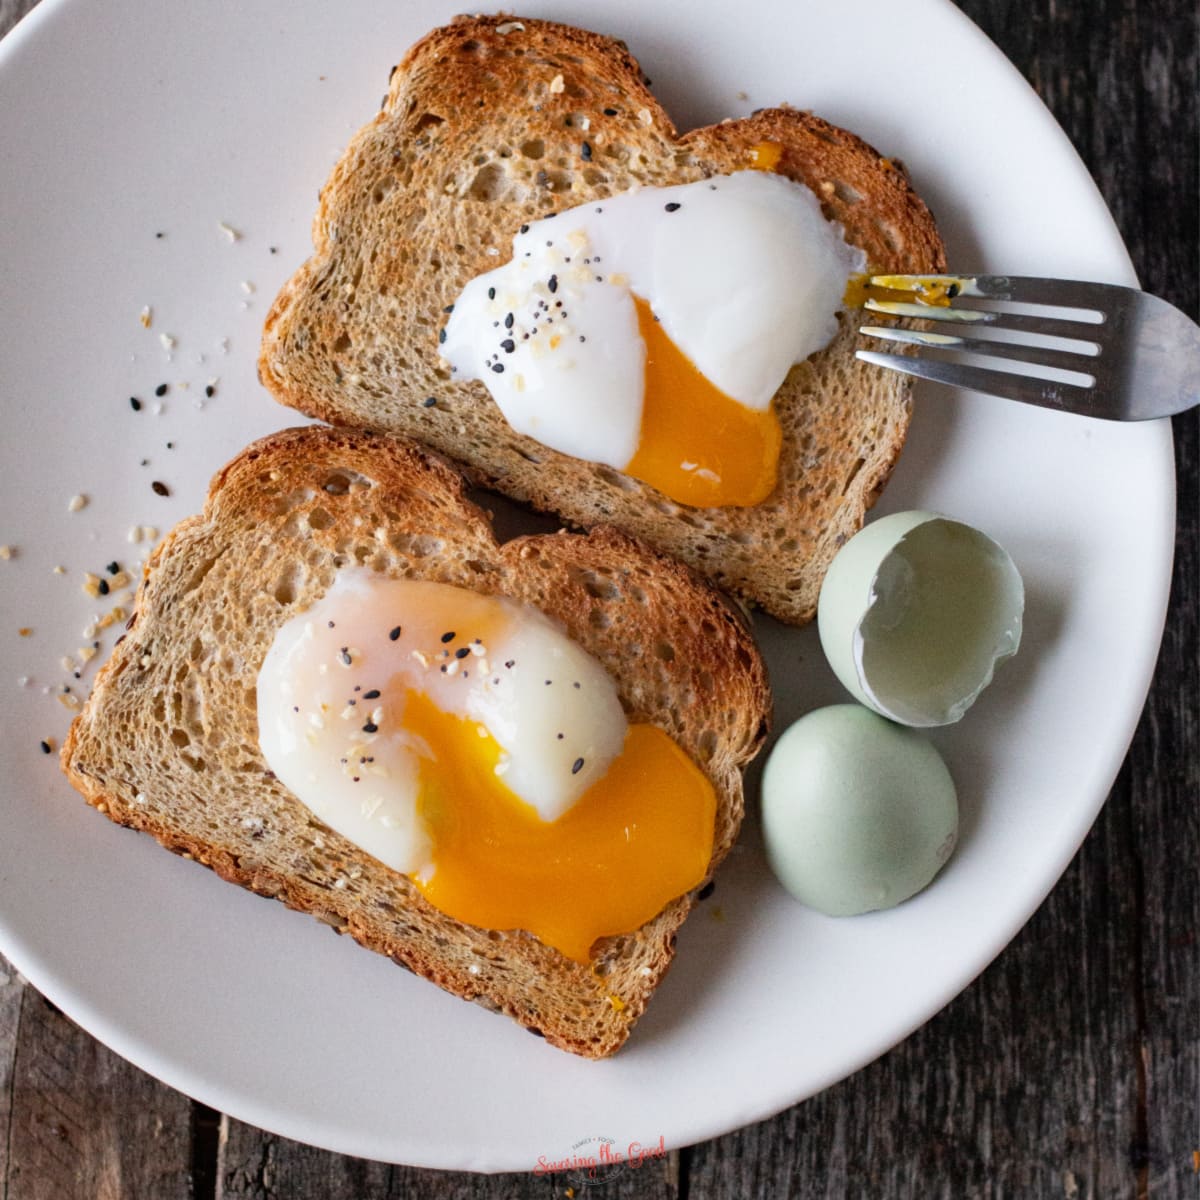 Sous vide eggs on toast, broken to show the runny yolk